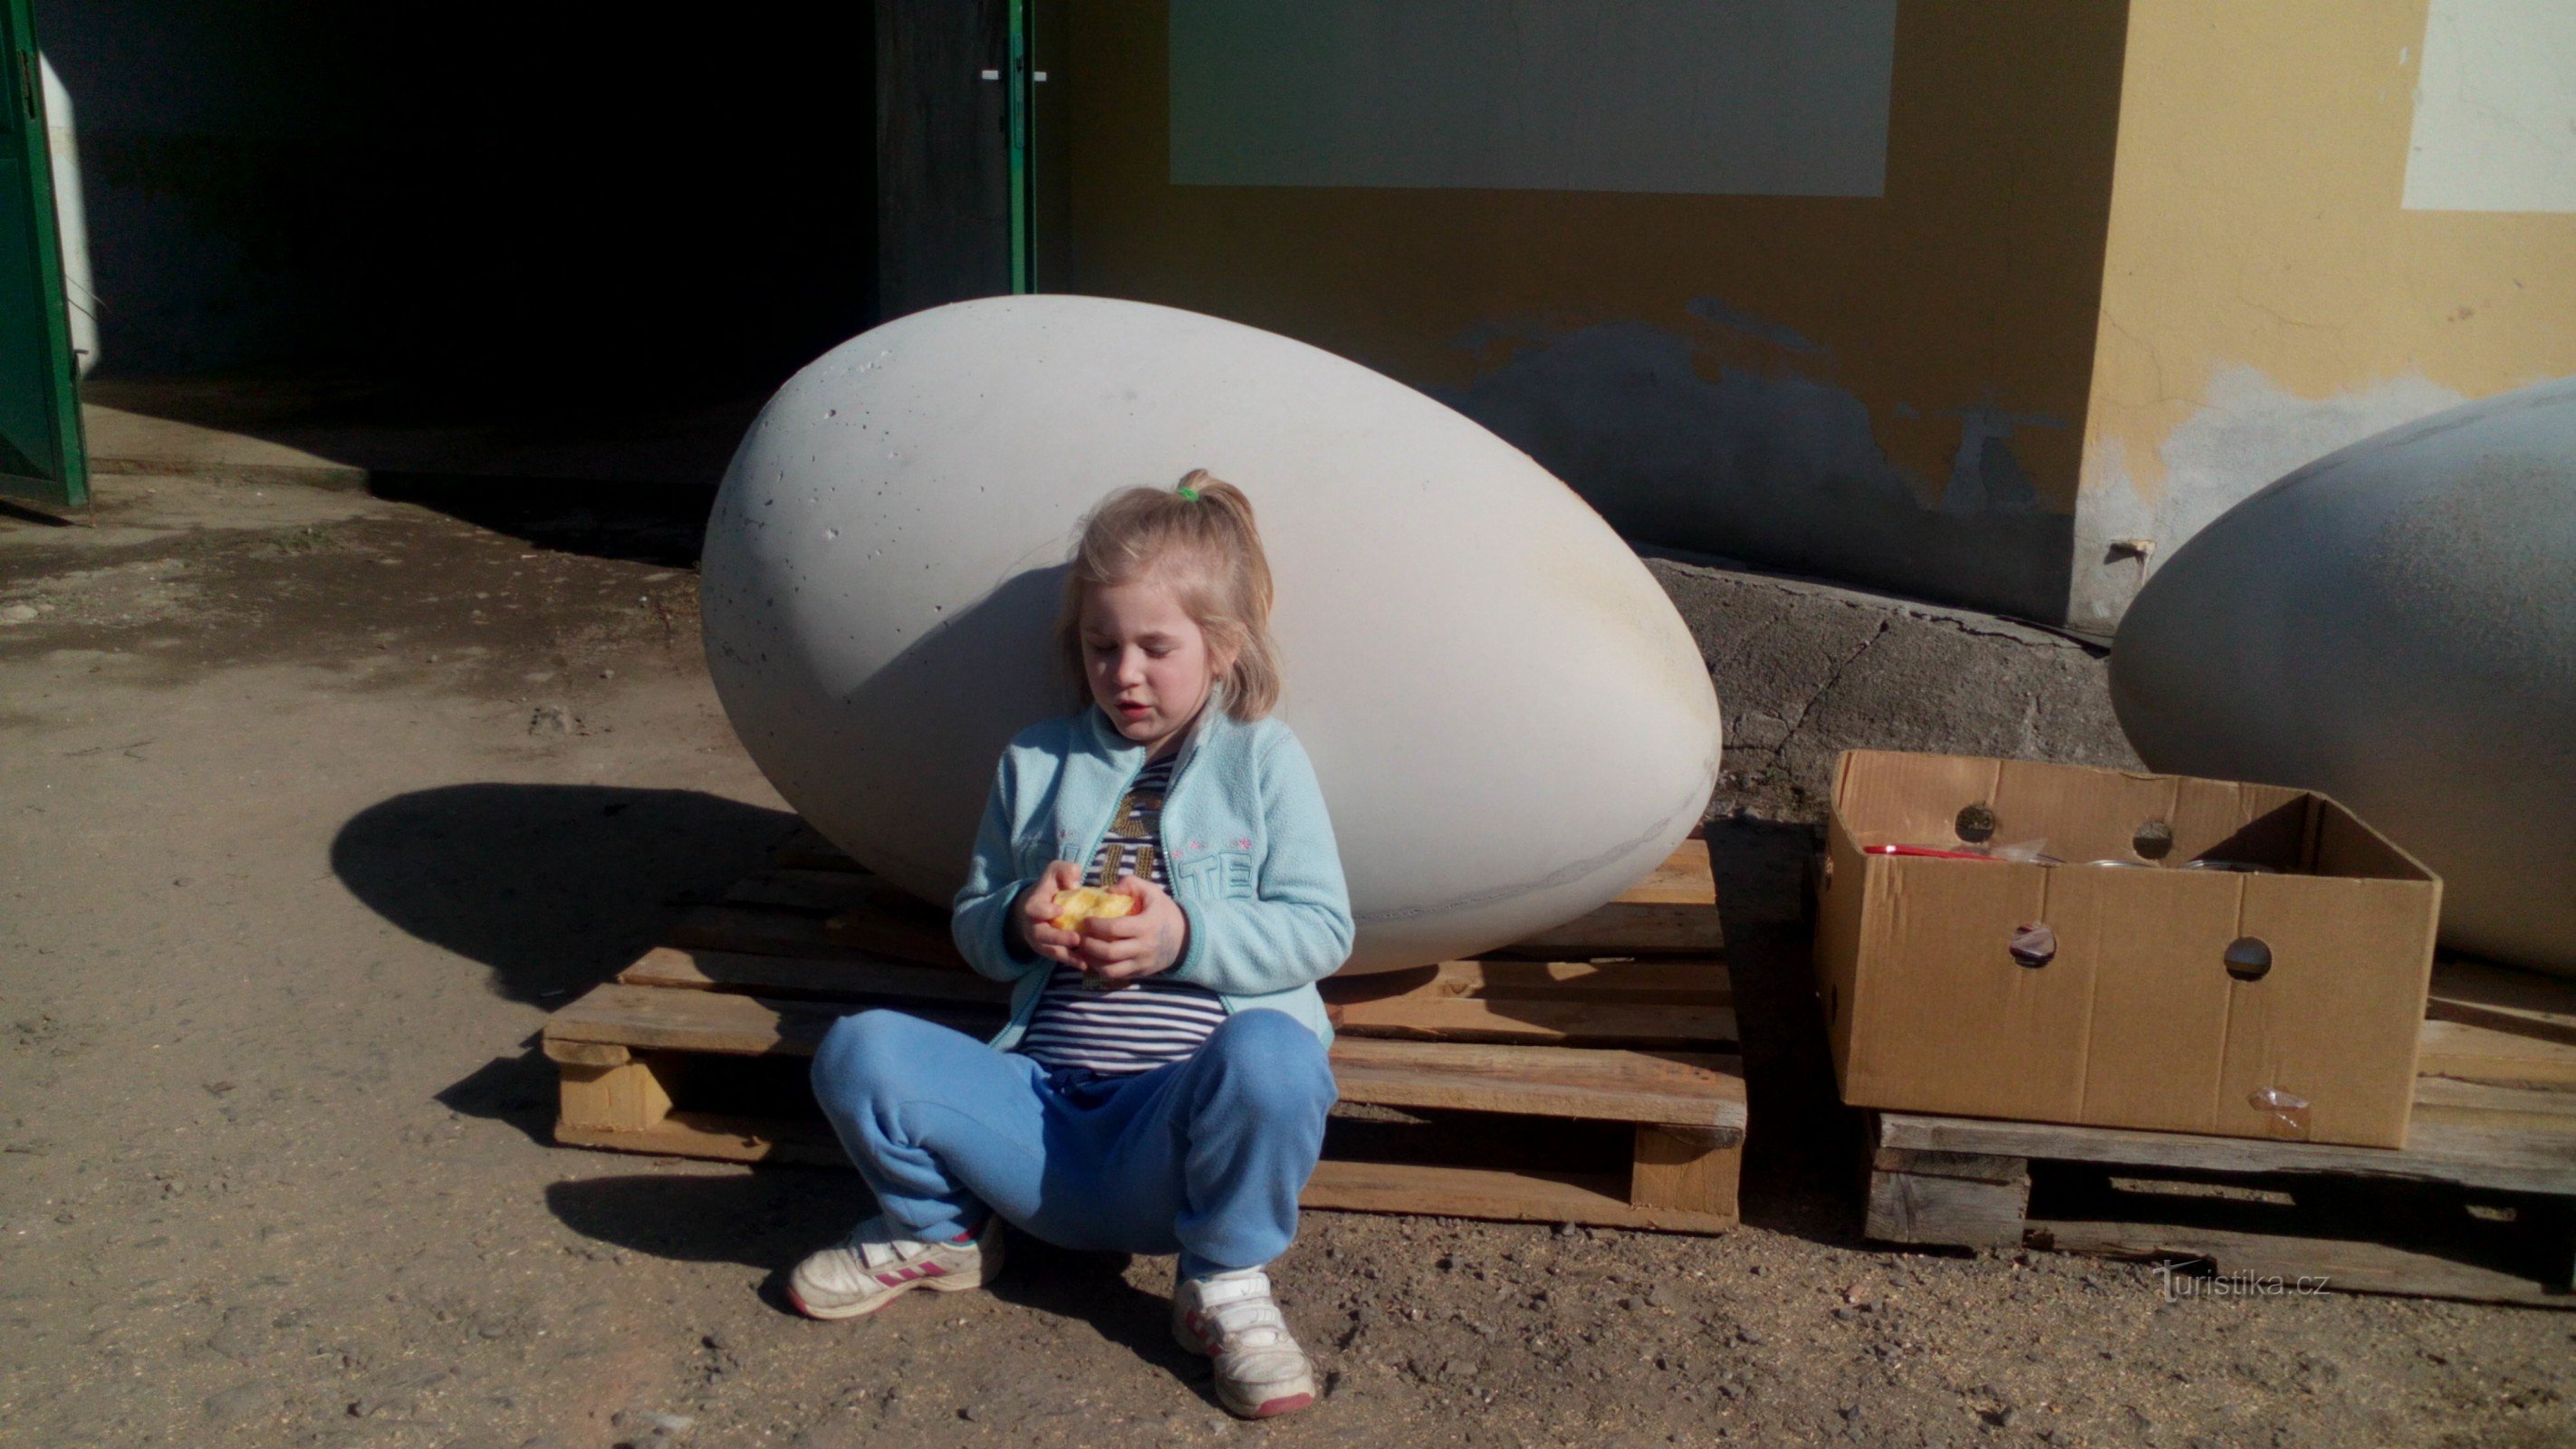 Easter in Hluboká will once again offer unique giant Easter eggs this year